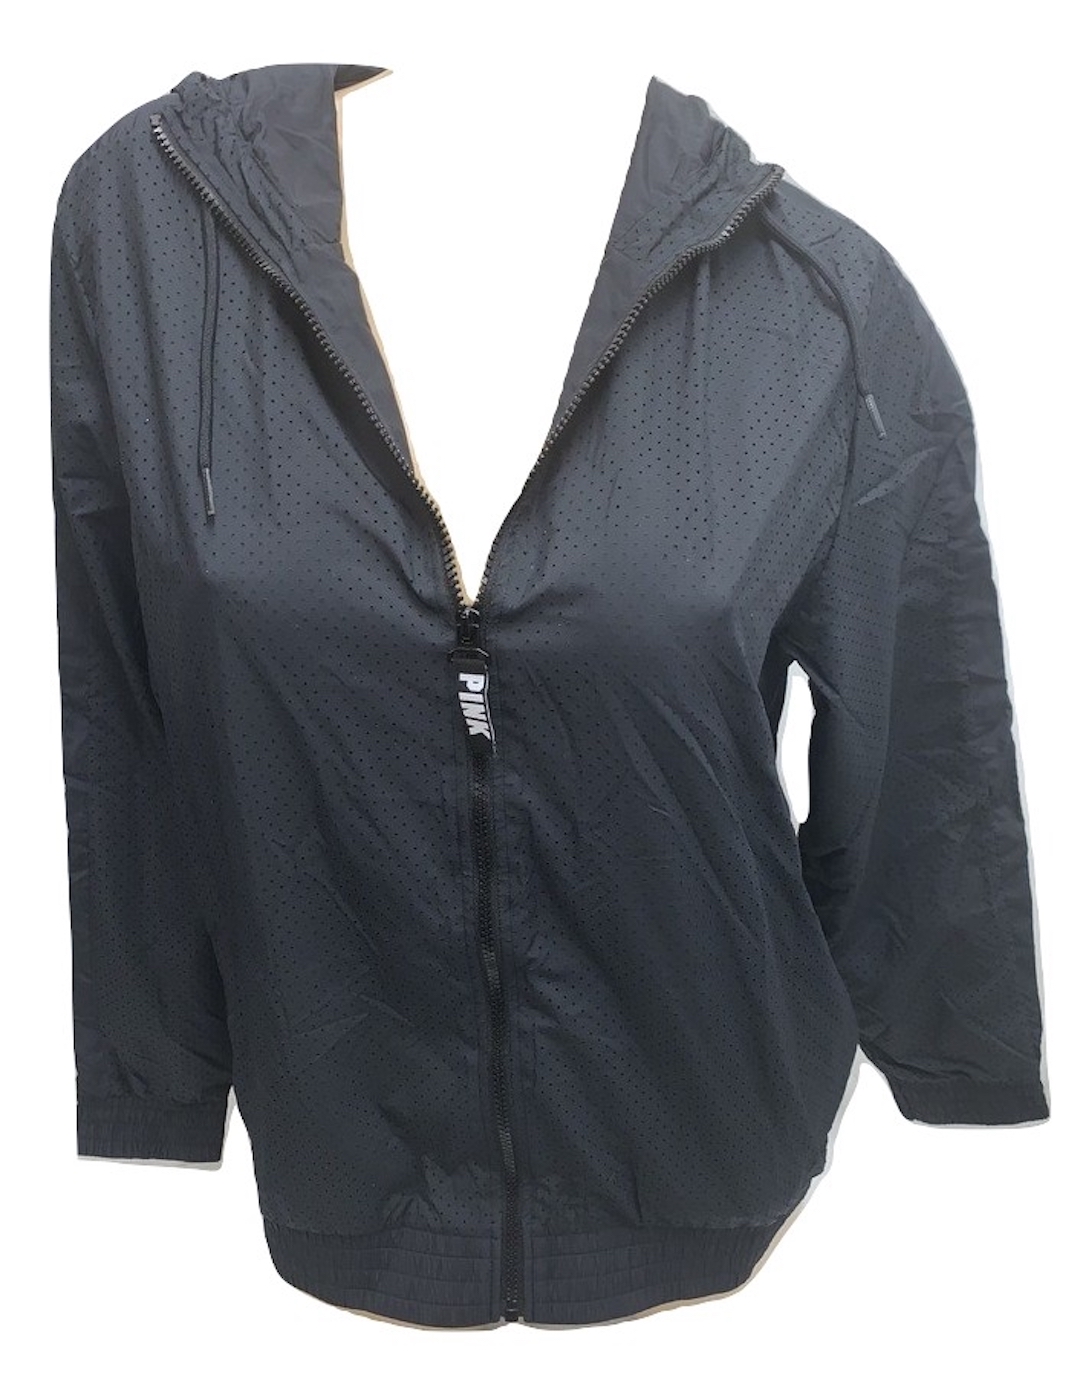 Victoria's Secret  Pink Anorak Windbreaker Jacket Full Zip Color Black Size XSmall/Small NWT - image 1 of 3